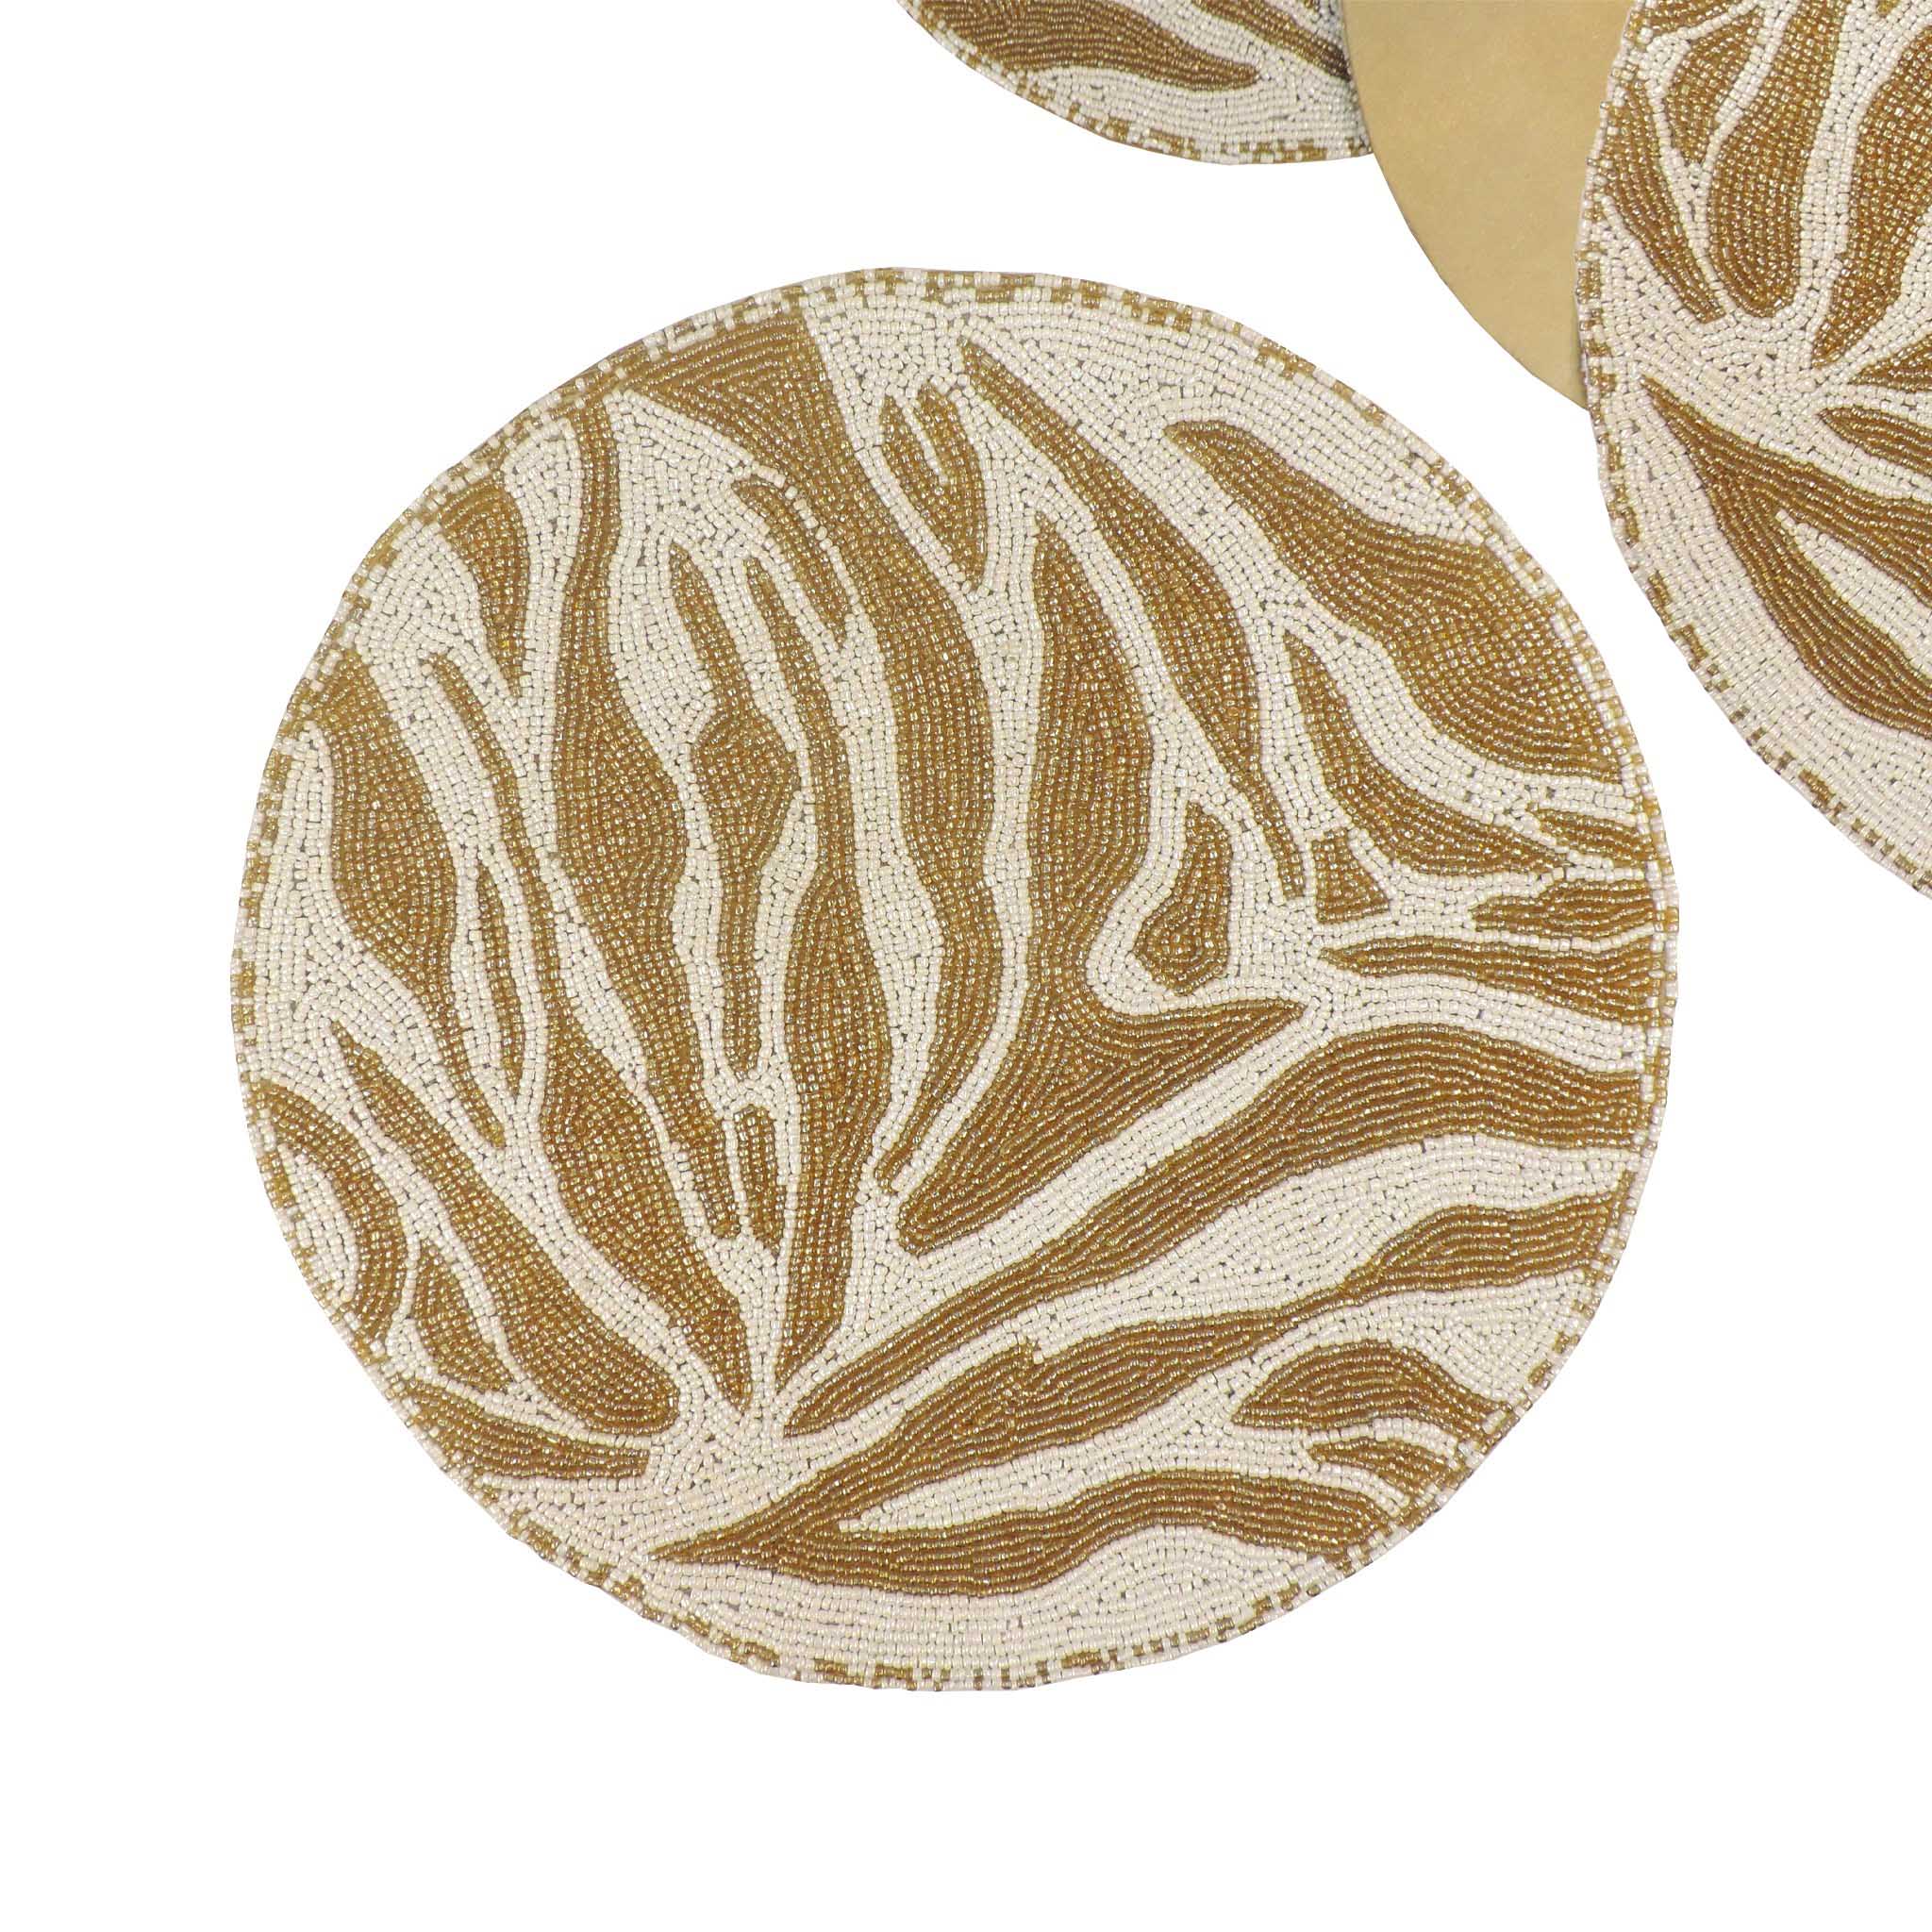 Modern Camo Glass Bead Embroidered Placemat in Cream Gold, Set of 2/4